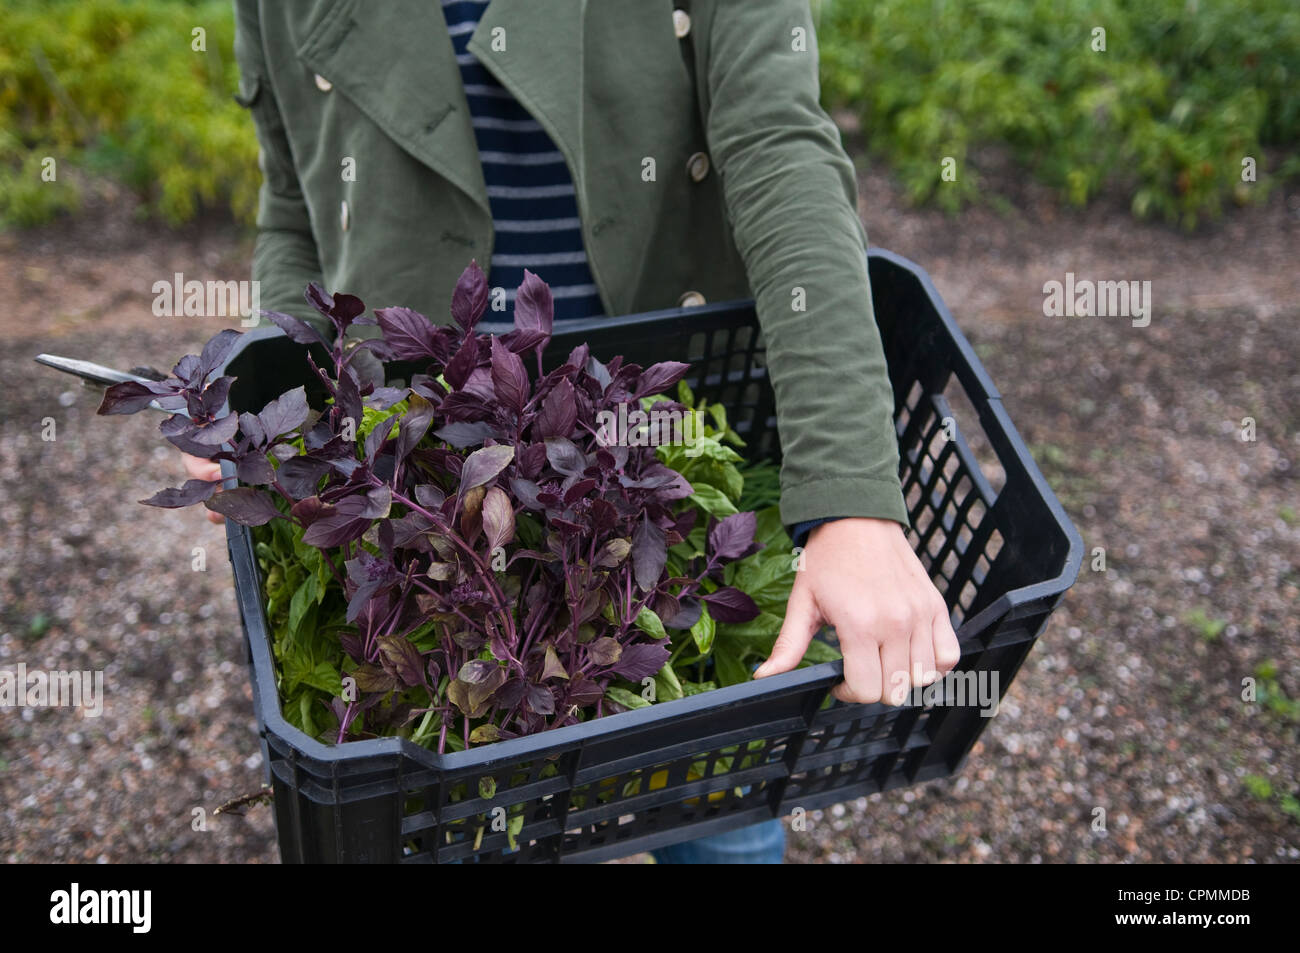 Urban rooftop farmer with crates of freshly harvest herbs Stock Photo